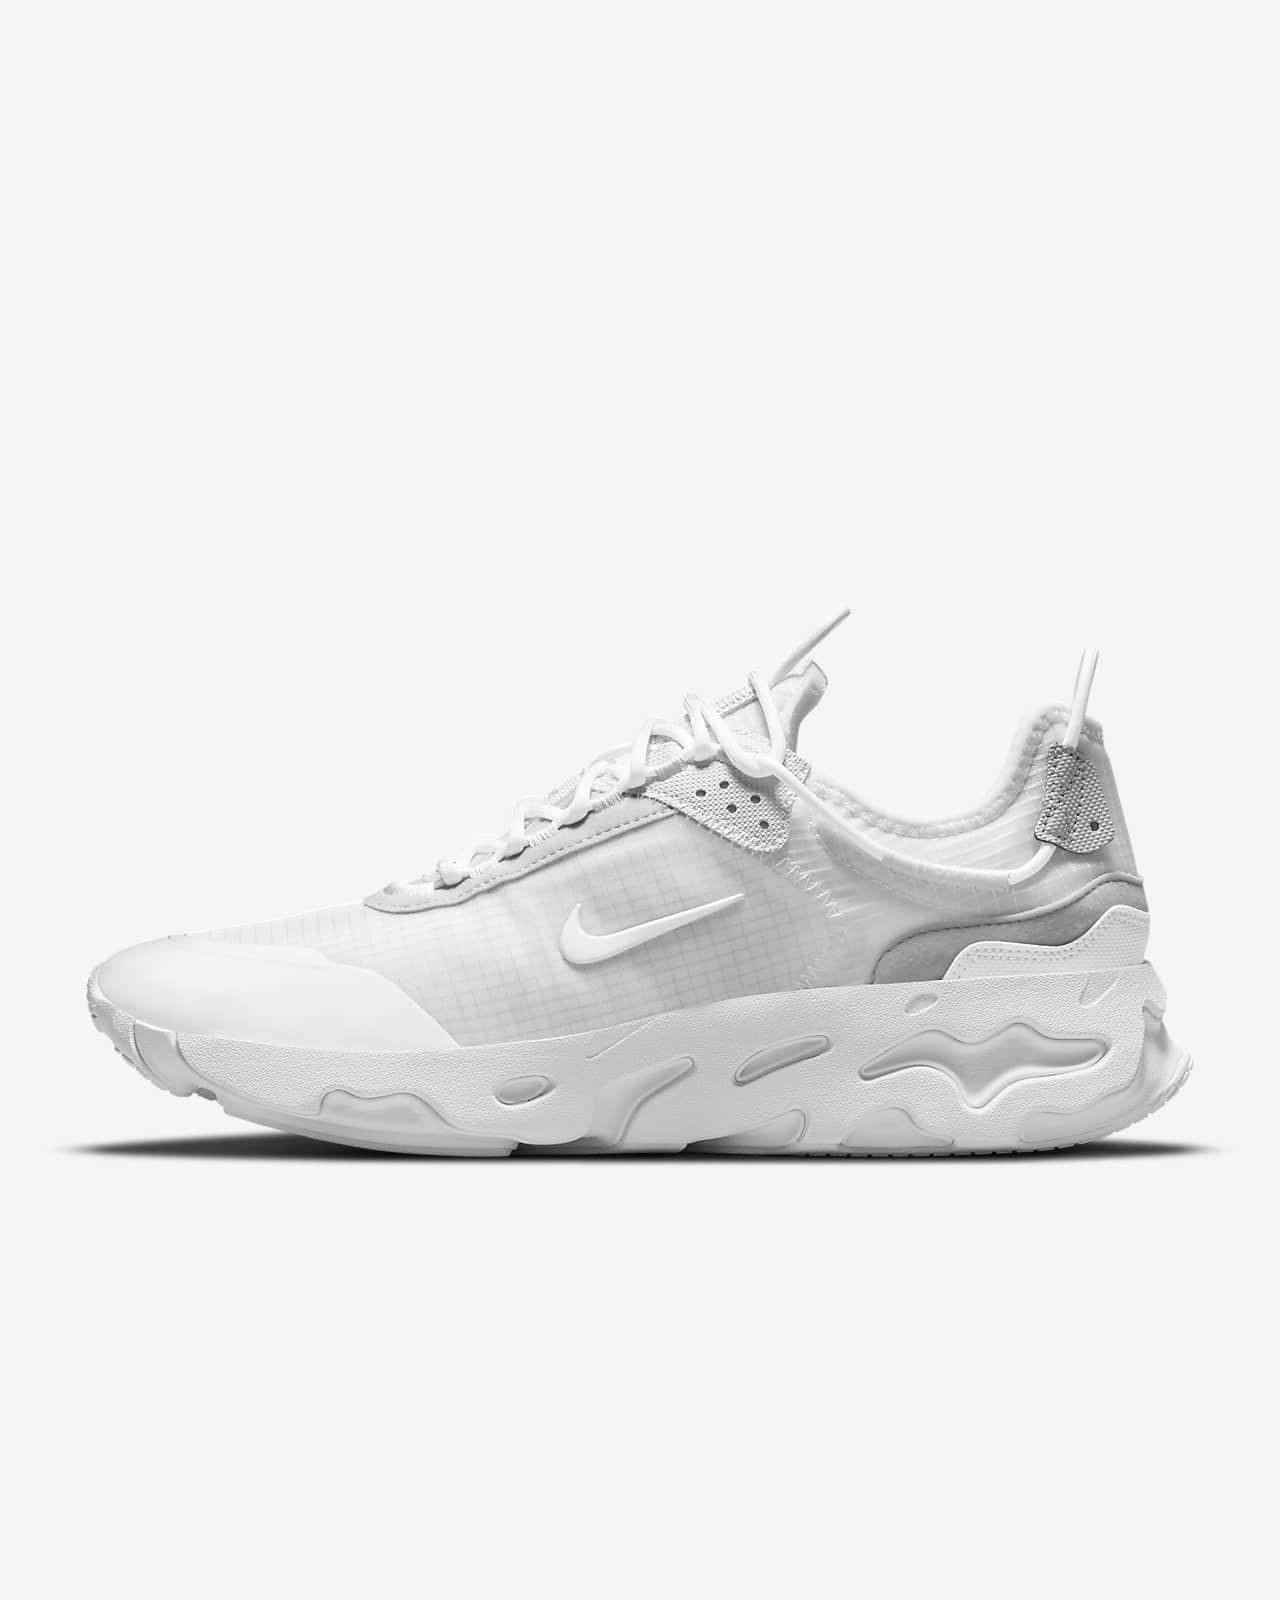 undefined | Nike React Live